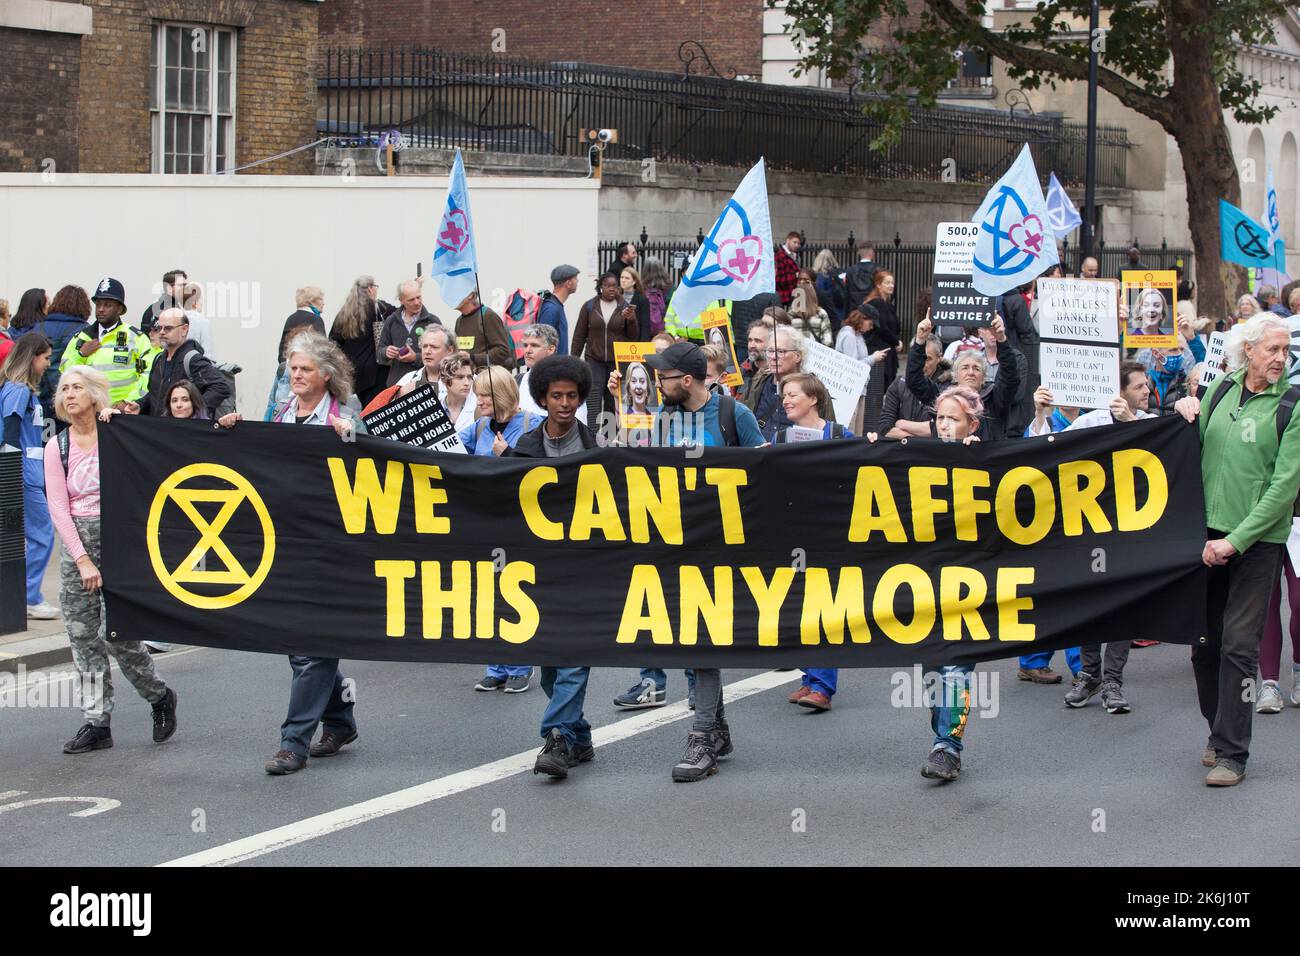 London, UK, 14 October 2022: Extinction Rebellion march down Whitehall to Downing Street, where they symbollically burned energy bills. The slogan of the protest was 'We Can't Afford This', referring both to energy bills in the cost of living crisis and to the climate crisis caused by burning fossil fuels. Posters showed Liz Truss as Employee of the Month, highlighting her connections to the fossil fuel industry. Anna Watson/Alamy Live News Stock Photo